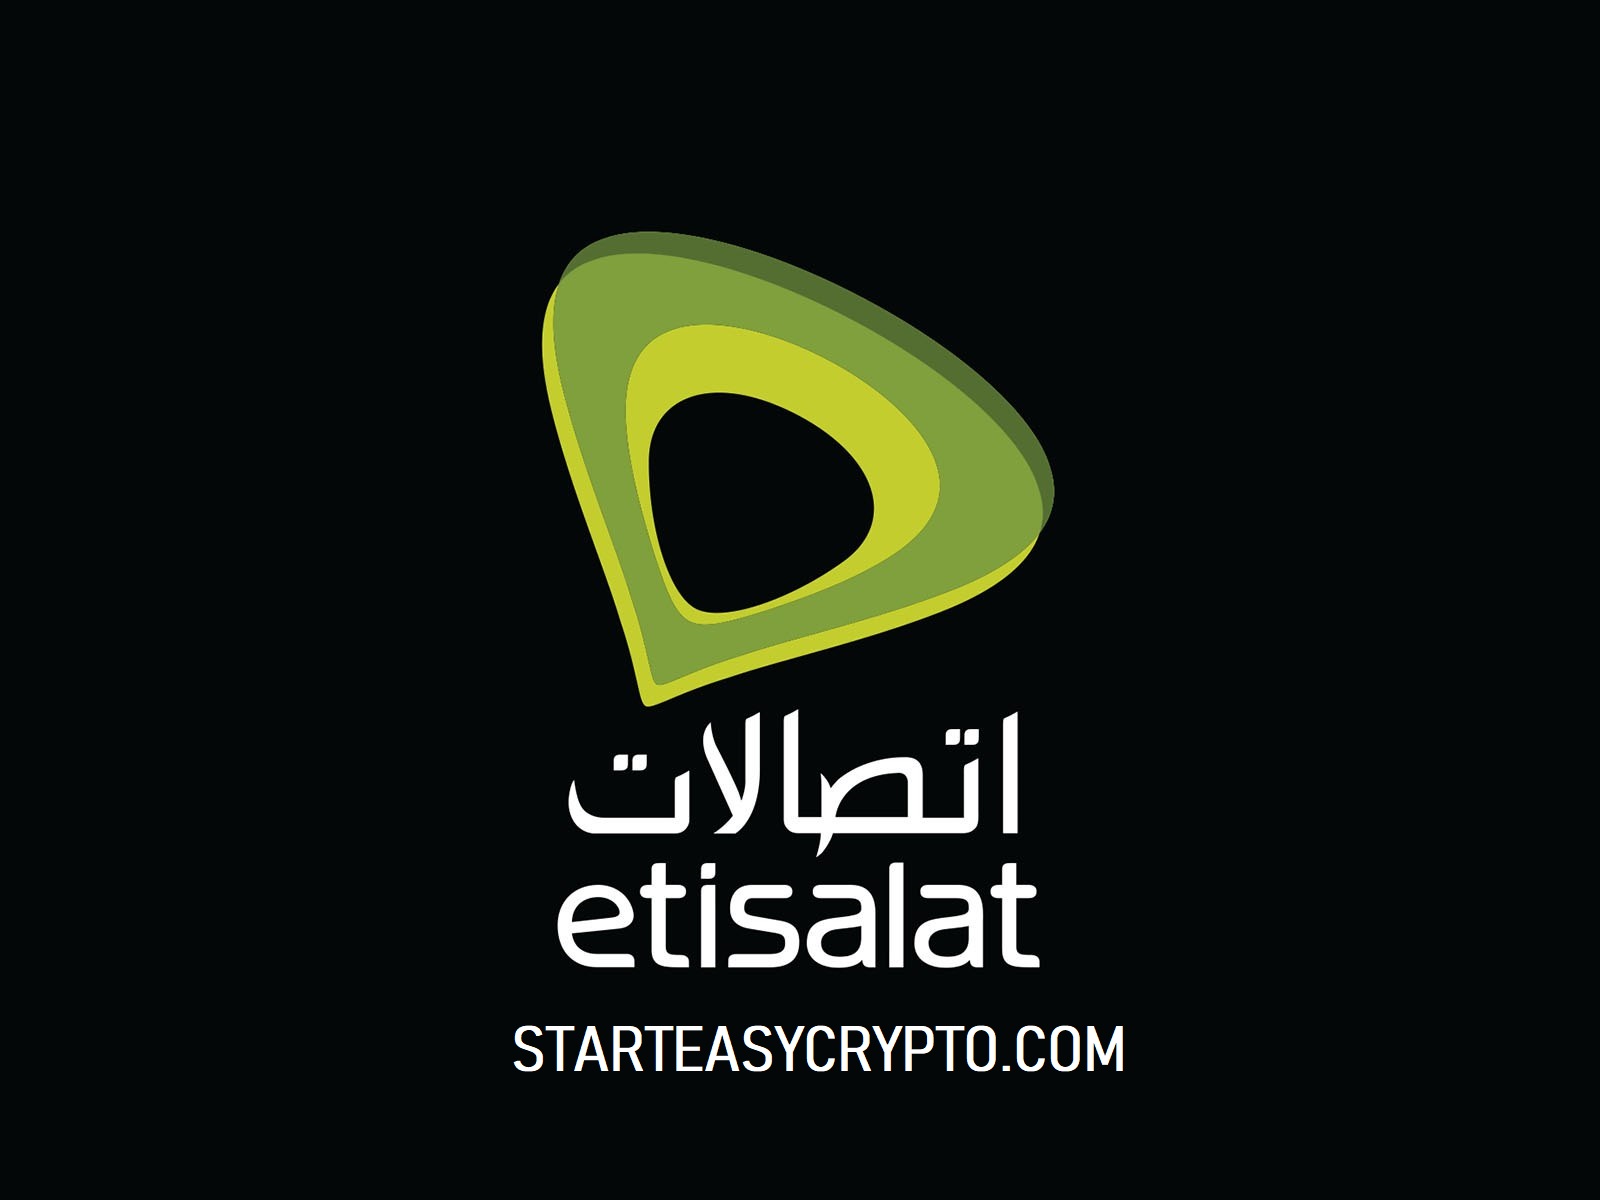 Etisalat Bill Payments Online through Credit Cards